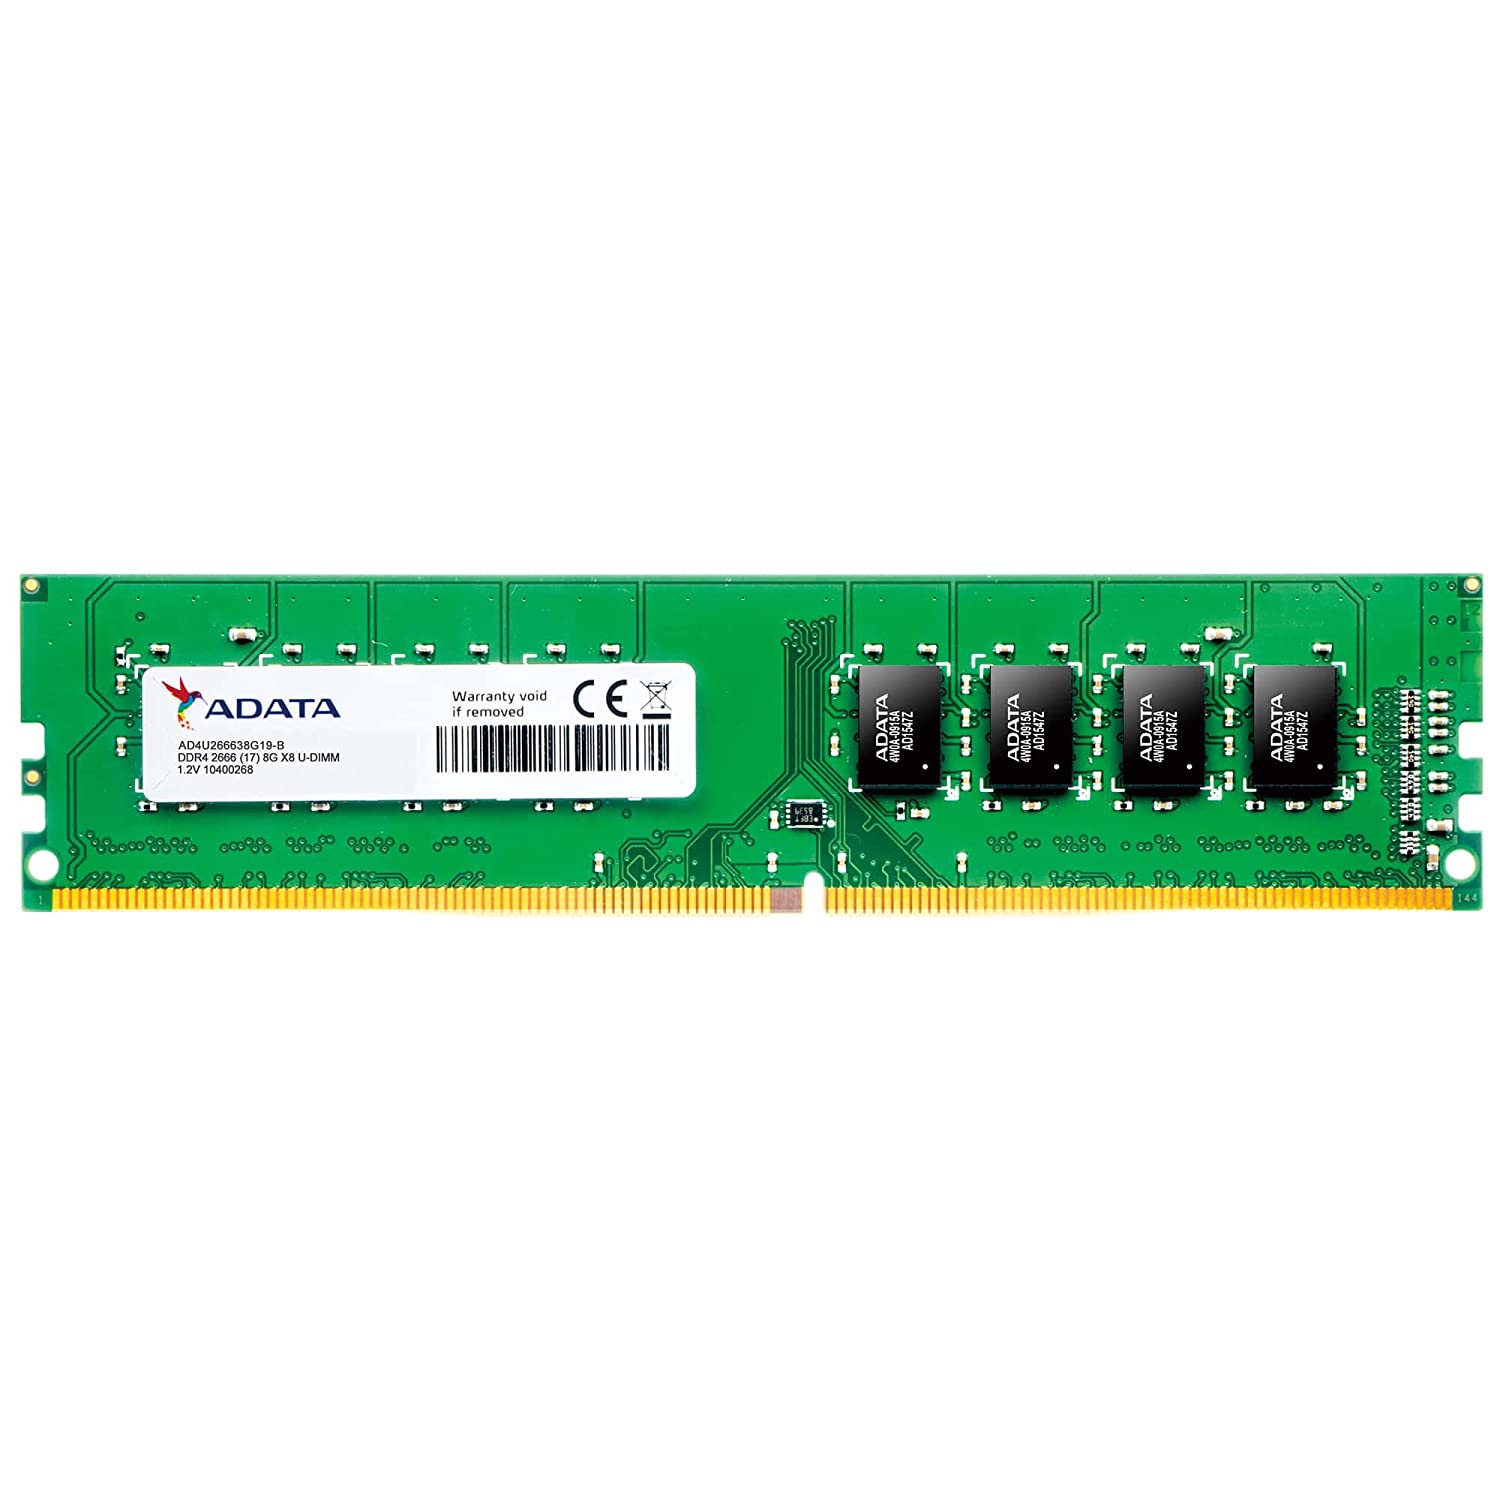 RAM 16GB DDR4 3200MHZ ADATA/APACER/CRUCIAL/TEAMGROUP SIMPLE - Max